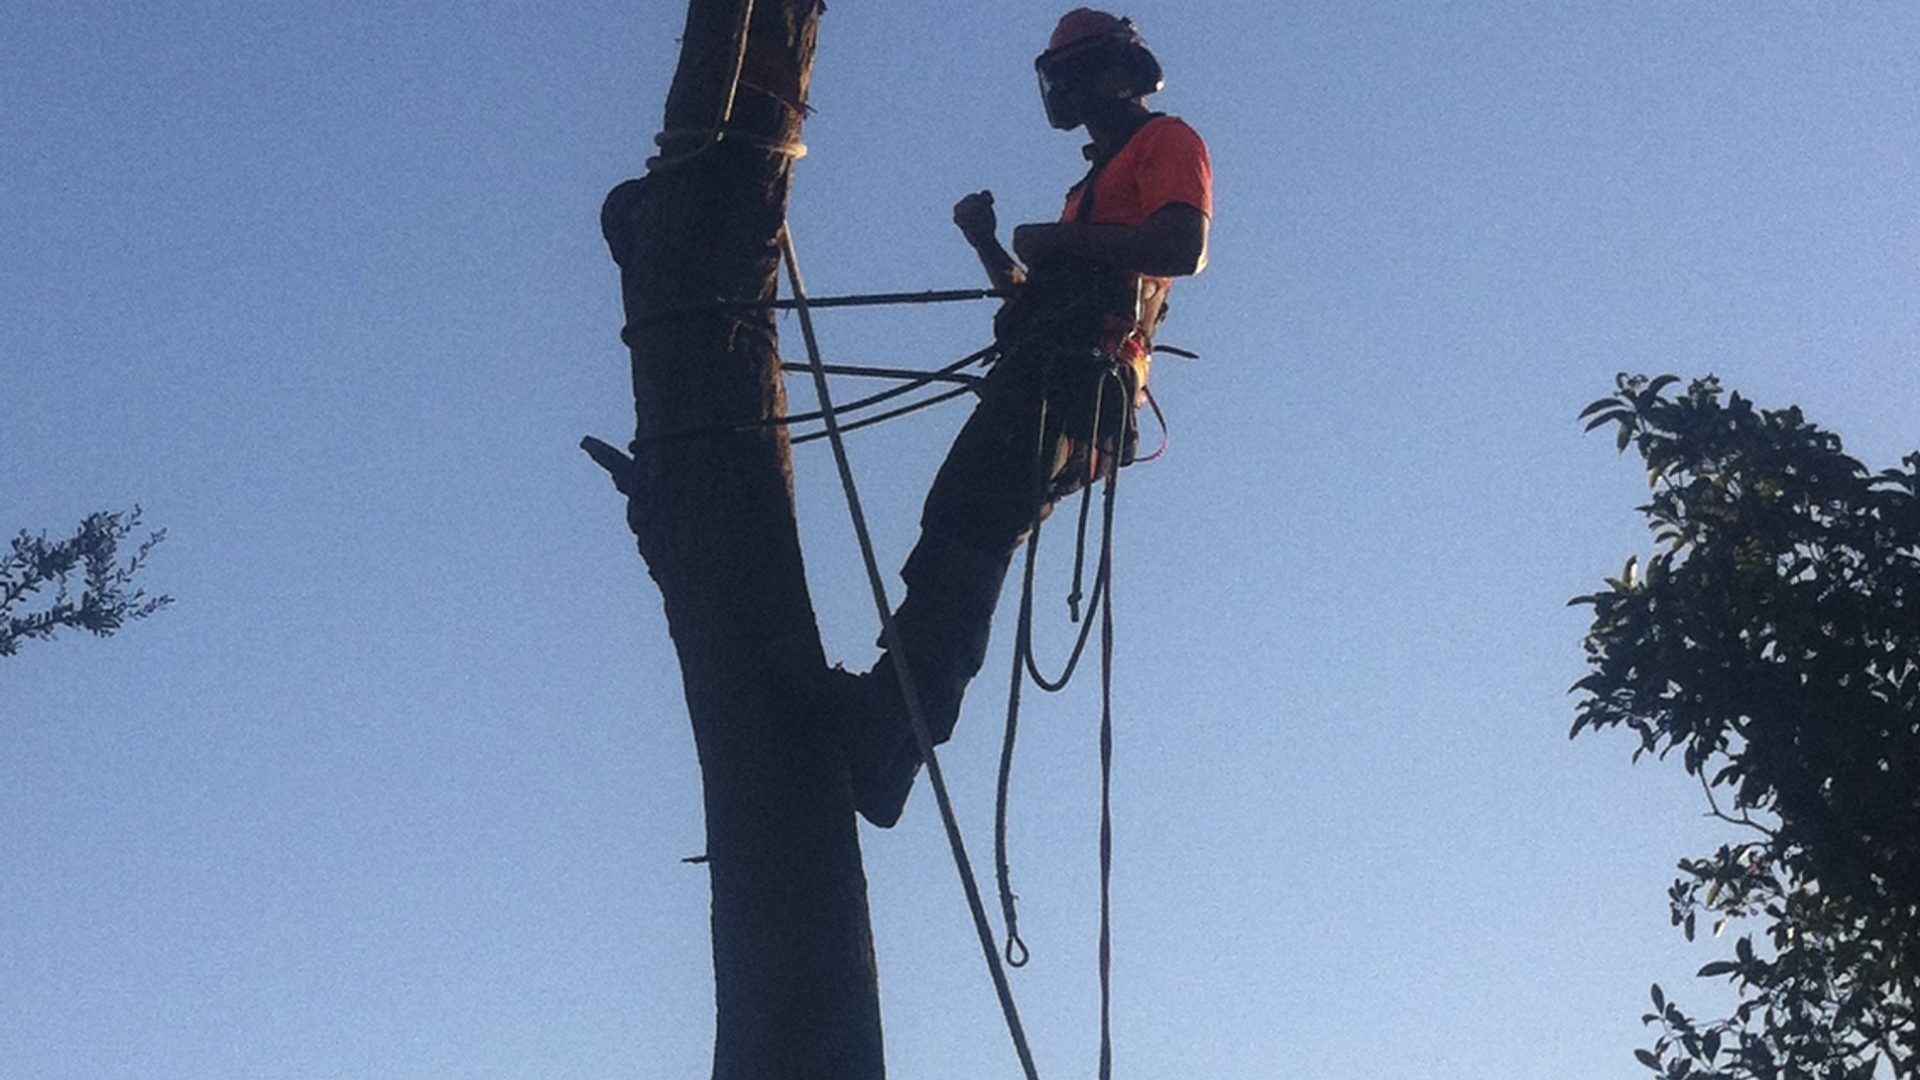 Carrum Tree Services, Carrum Tree Removals, Pruning and Lopping